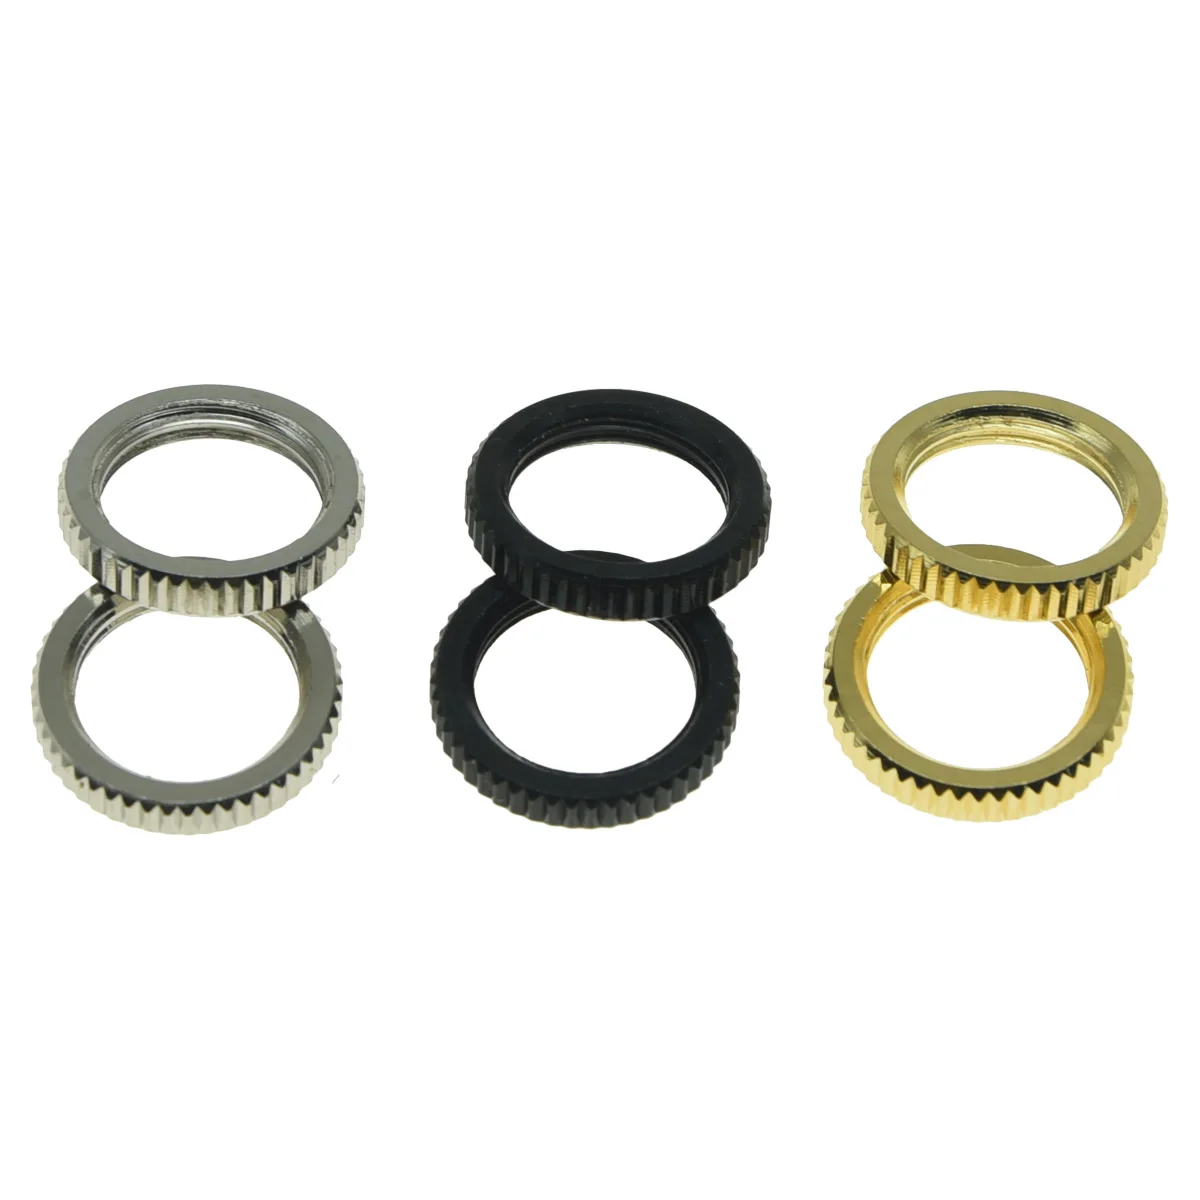 

Dopro Pack of 2 USA Spec 15/32" Fine Knurled Guitar Toggle Switch Nut Fits Switchcraft Switches Nickel/Black/Gold